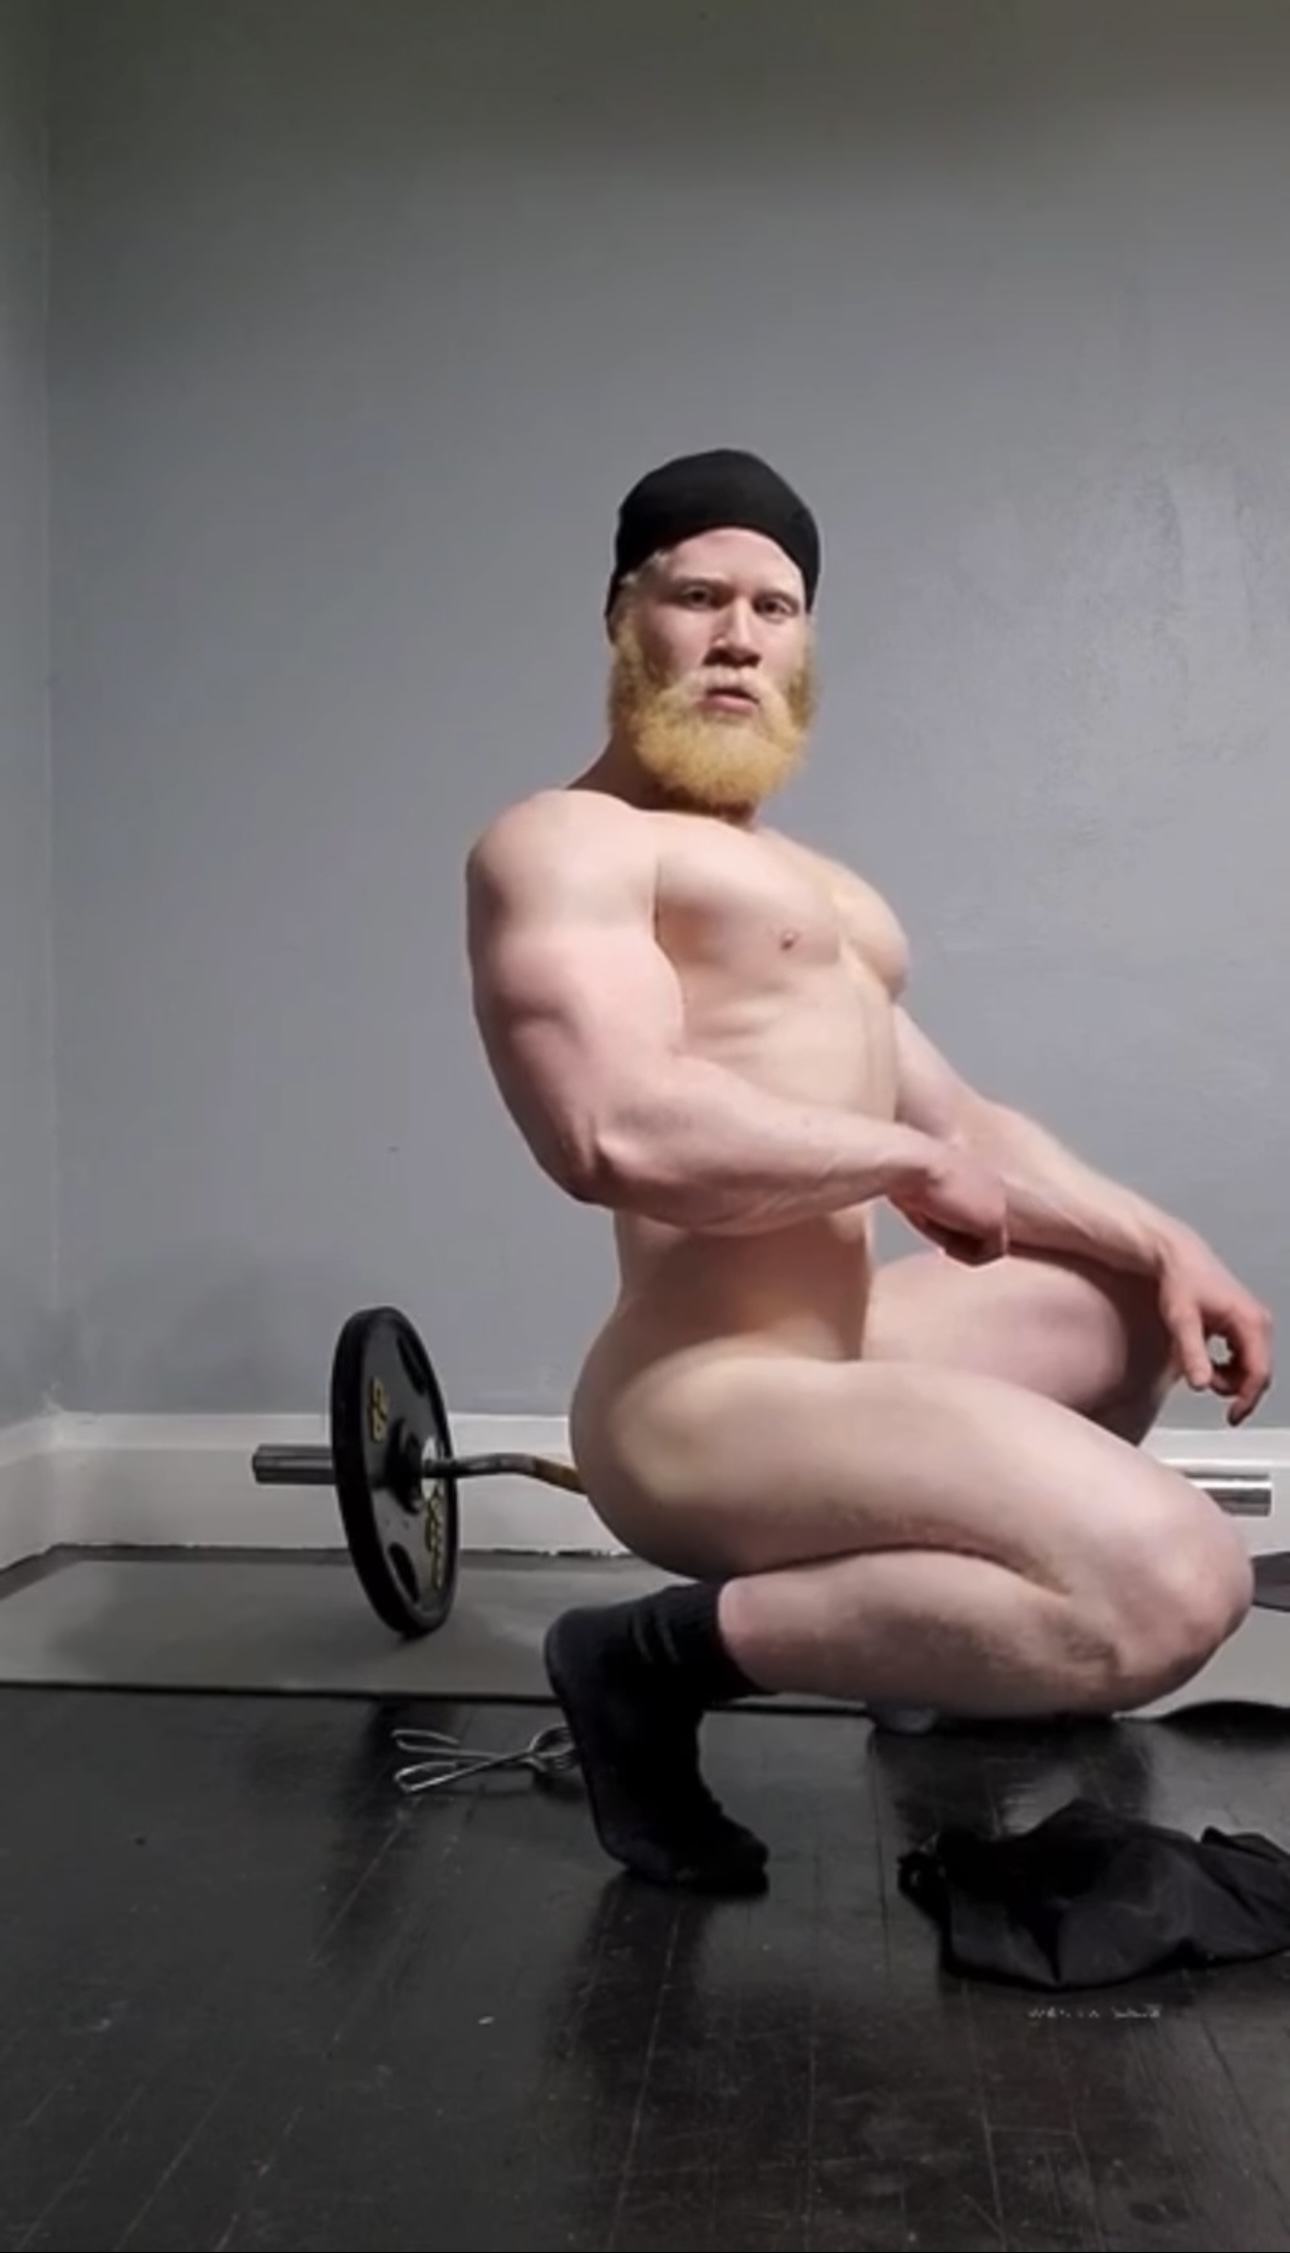 Albino African Porn - Muscular Albino bull works out naked - ThisVid.com em inglÃªs